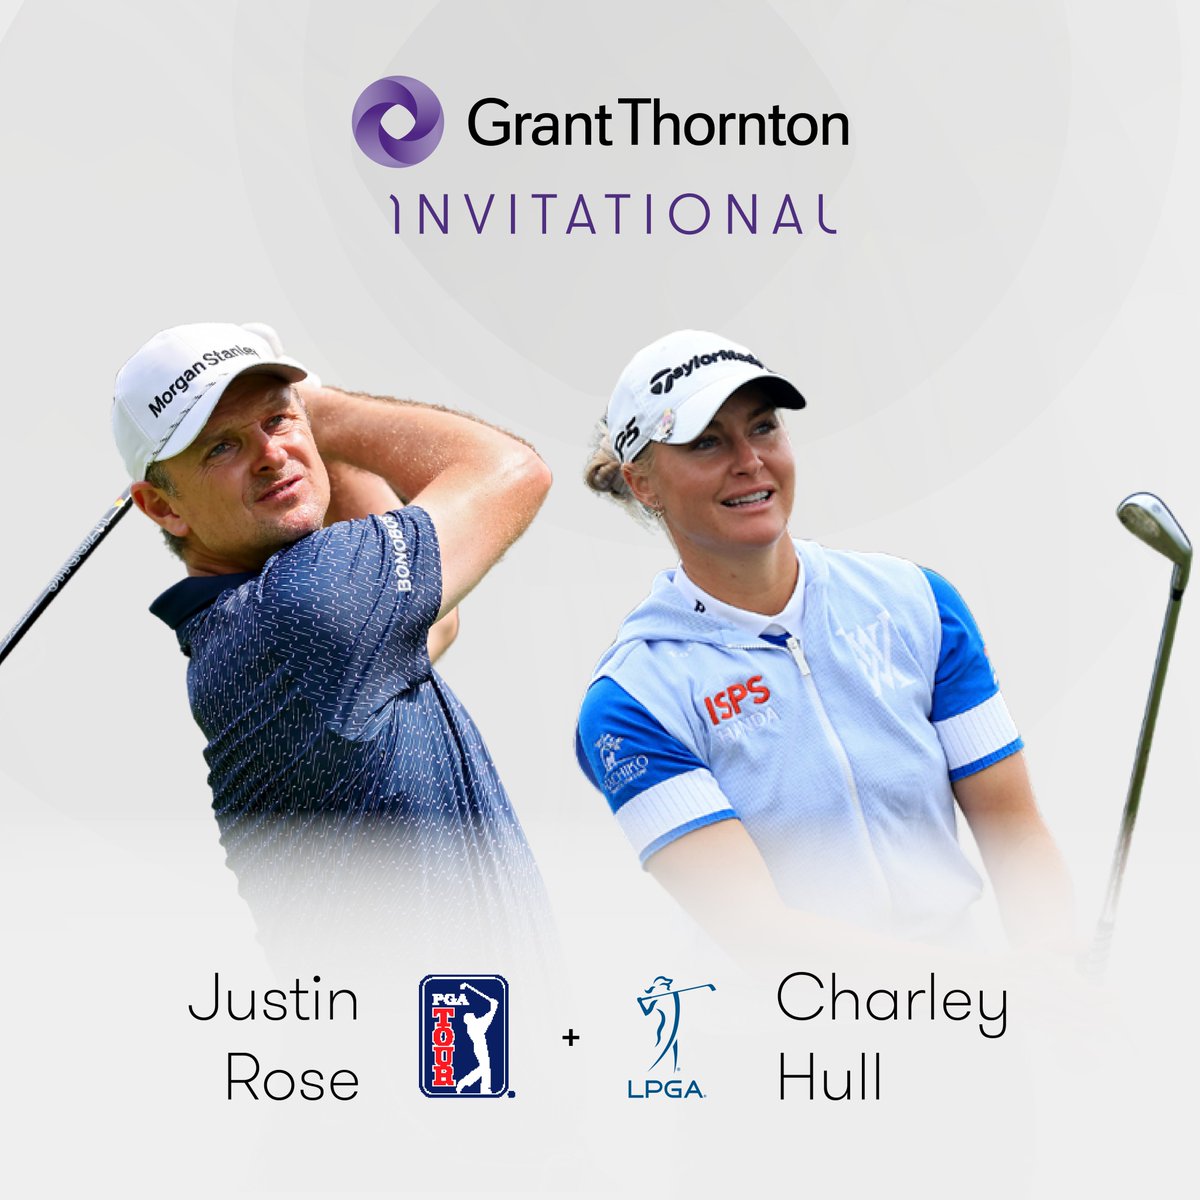 BREAKING: Justin Rose and Charley Hull look to build off their Ryder Cup and Solheim Cup victories and will team up in an all-England pairing for the Grant Thornton Invitational! 🏴󠁧󠁢󠁥󠁮󠁧󠁿